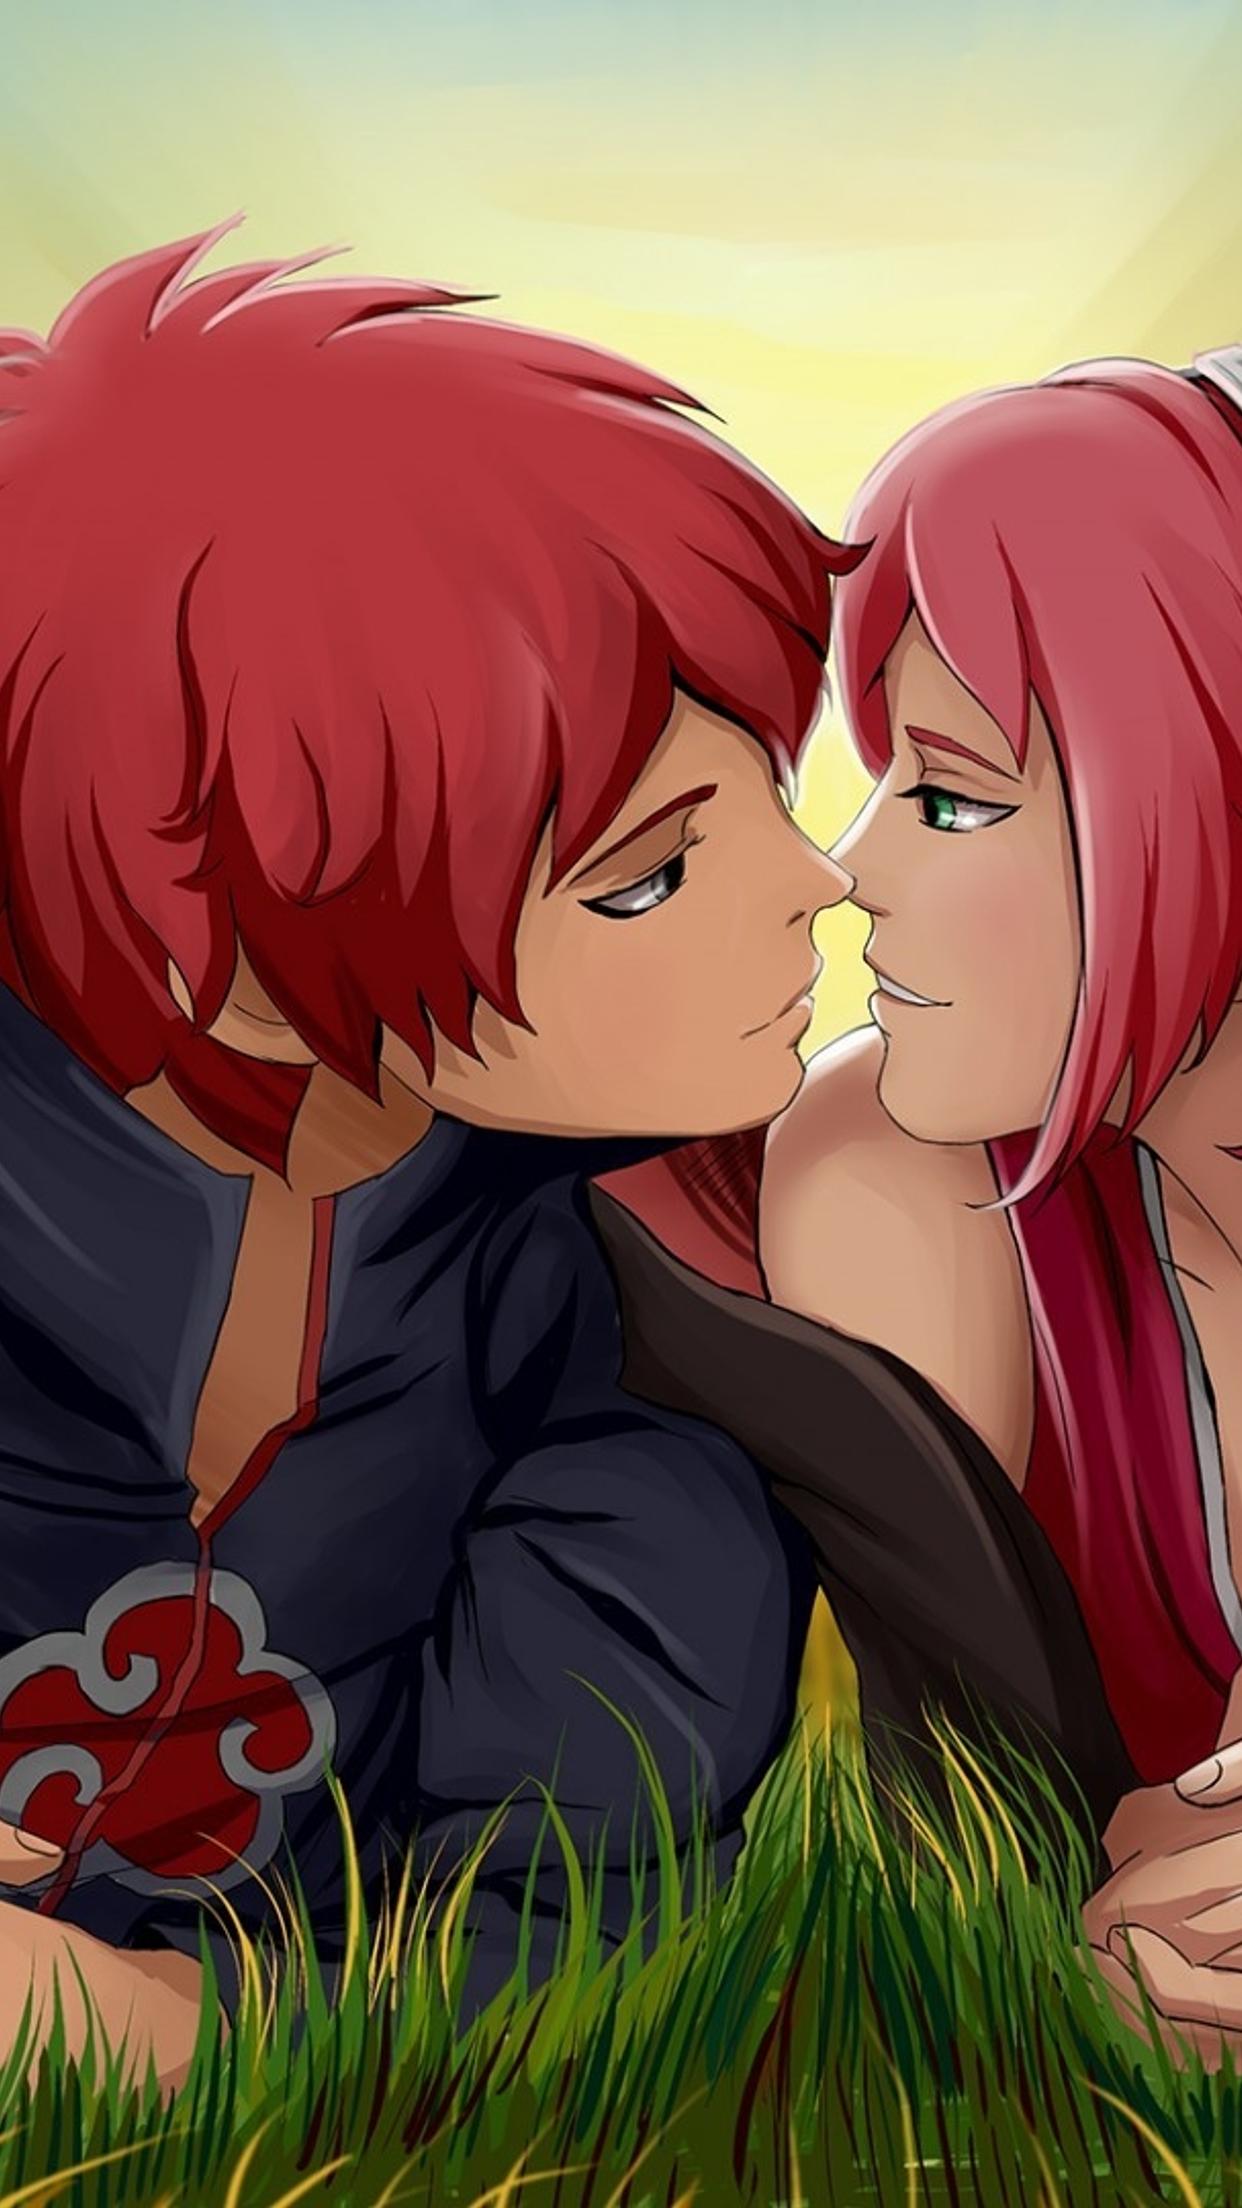 An anime couple with red hair kissing in the grass